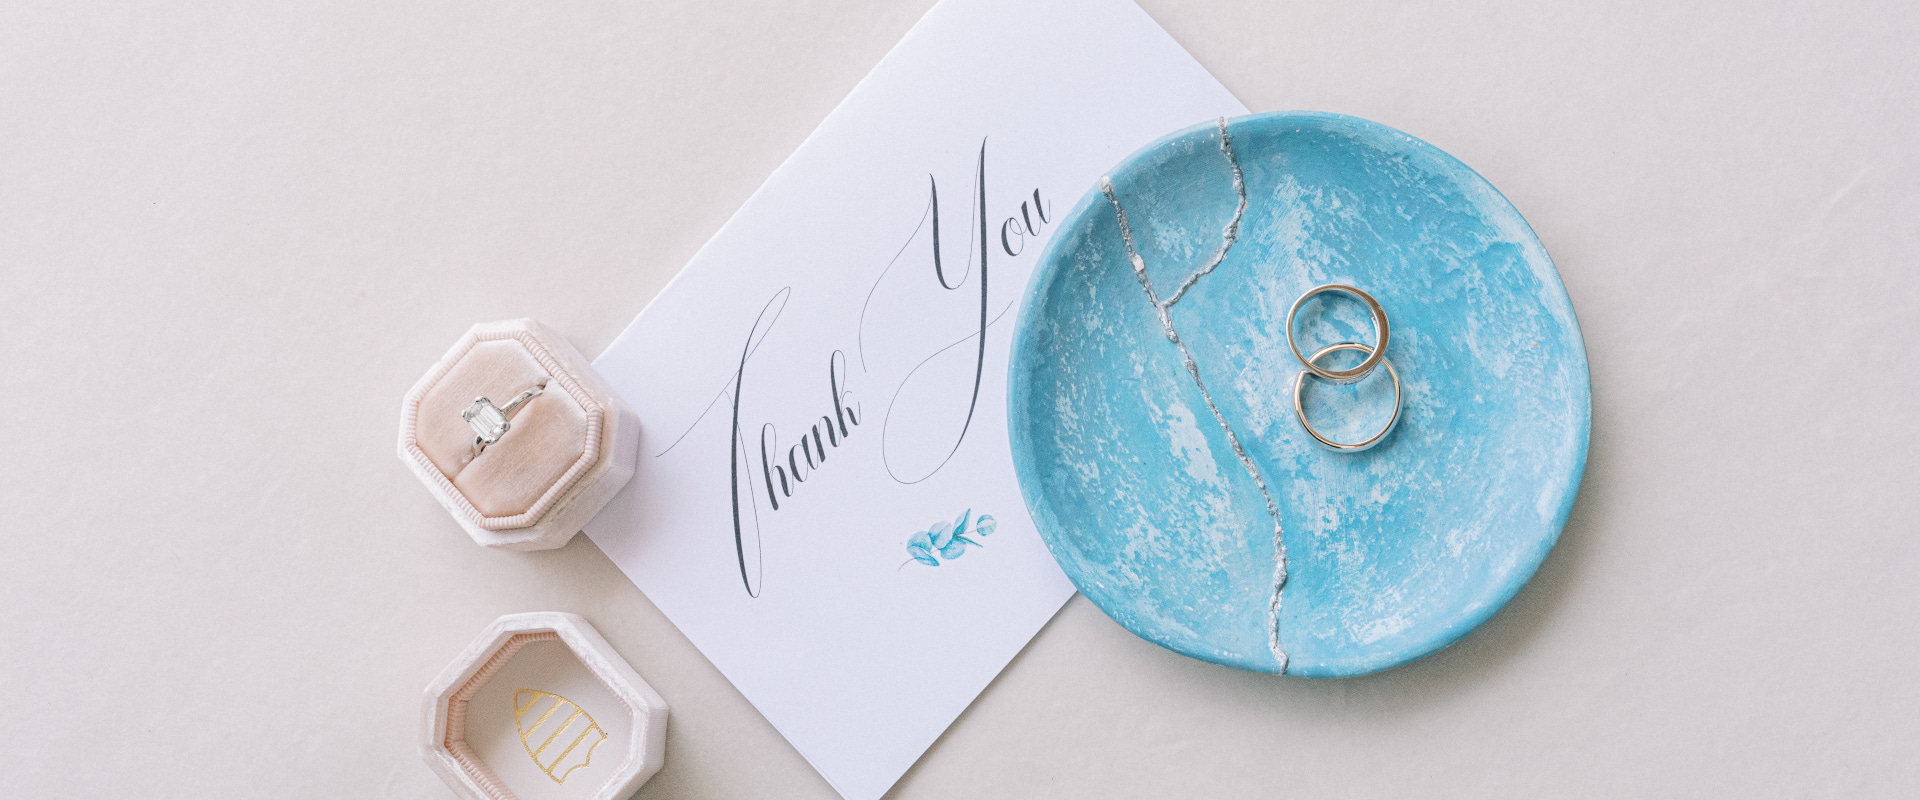 A wedding ring and a thank note placed on a blue plate, symbolizing the union of two hearts in a Mykonos wedding ceremony.